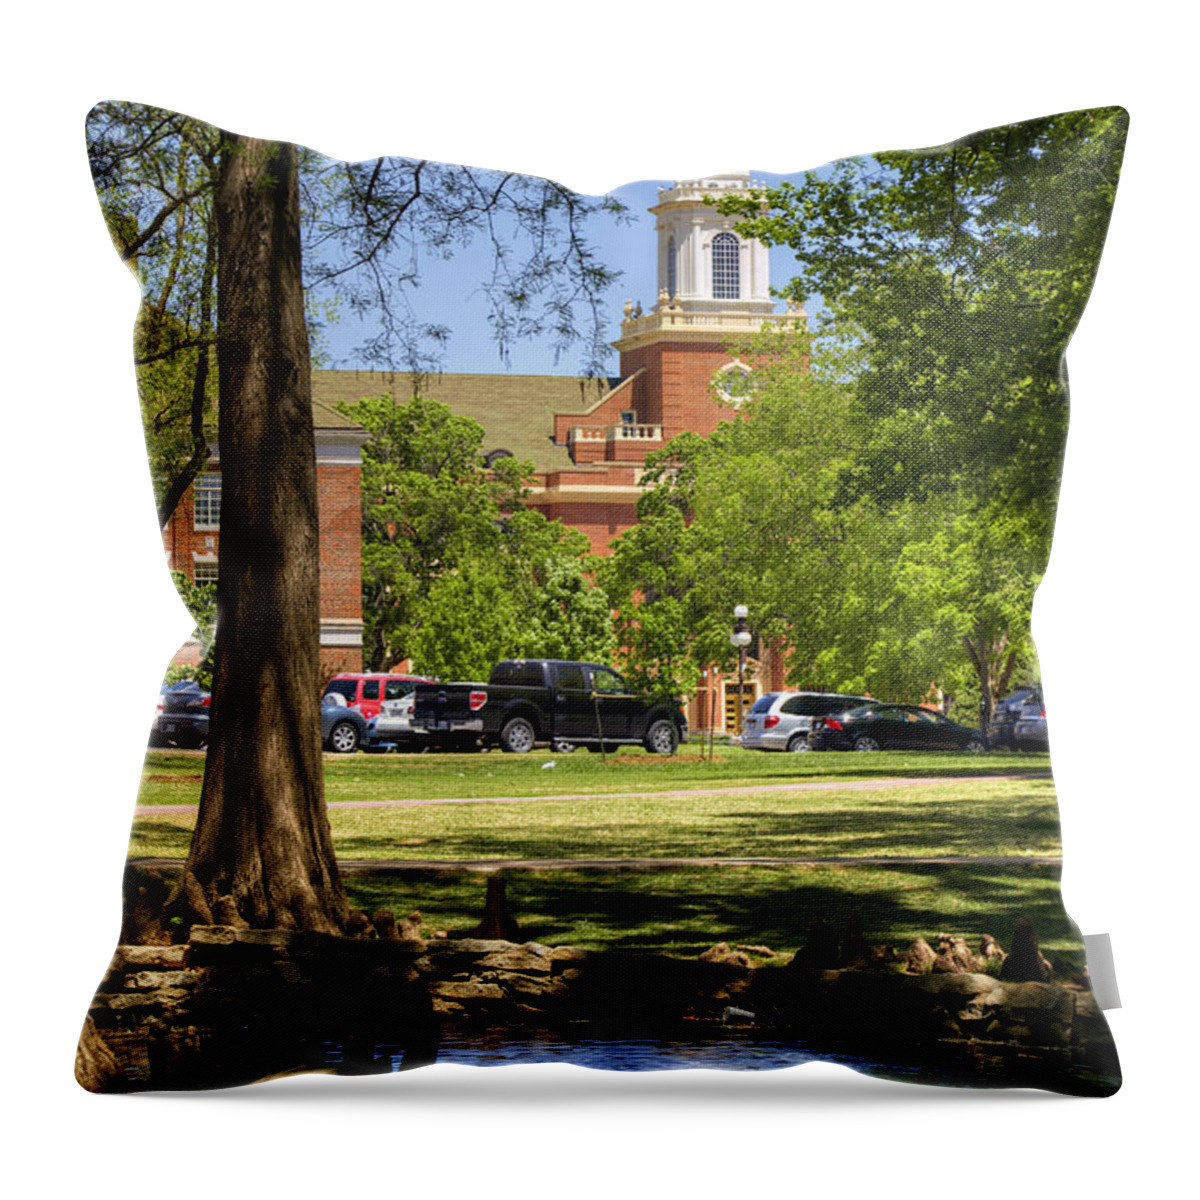 Oklahoma Throw Pillow featuring the photograph Edmon Low Library by Ricky Barnard